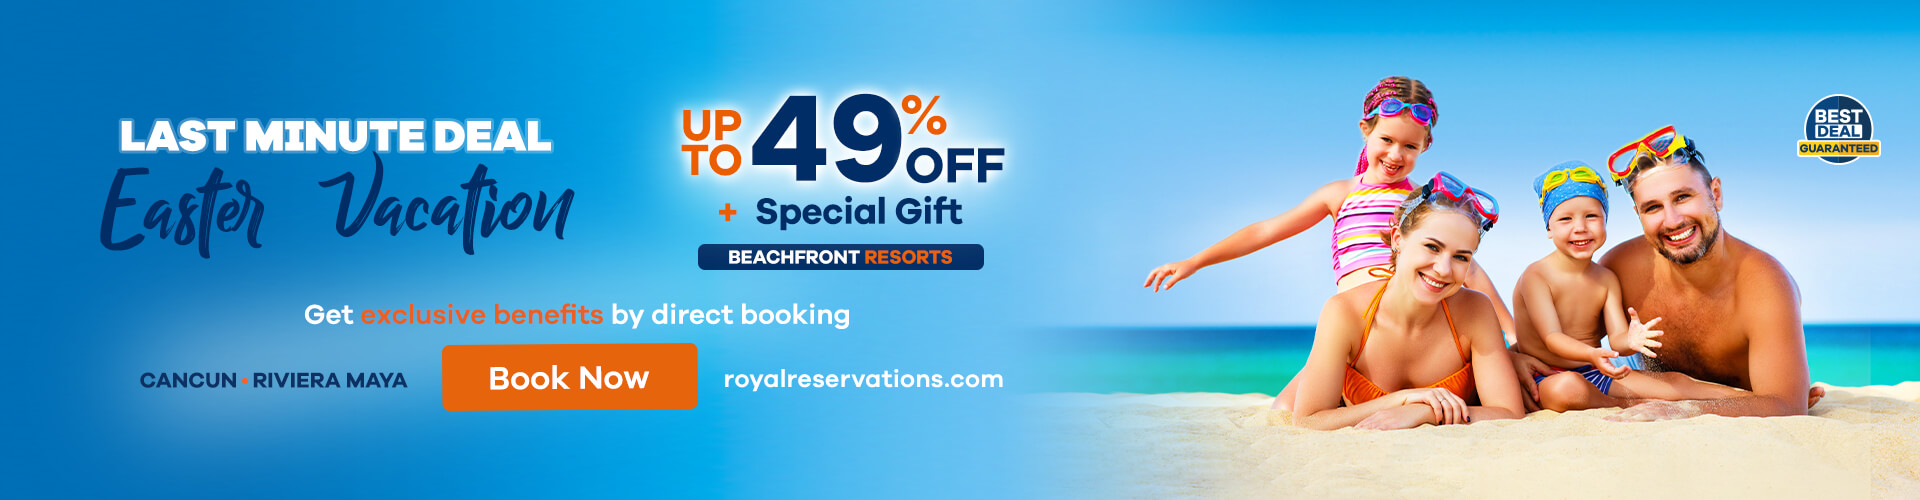 Easter Vacation Deal in Cancun Riviera Maya